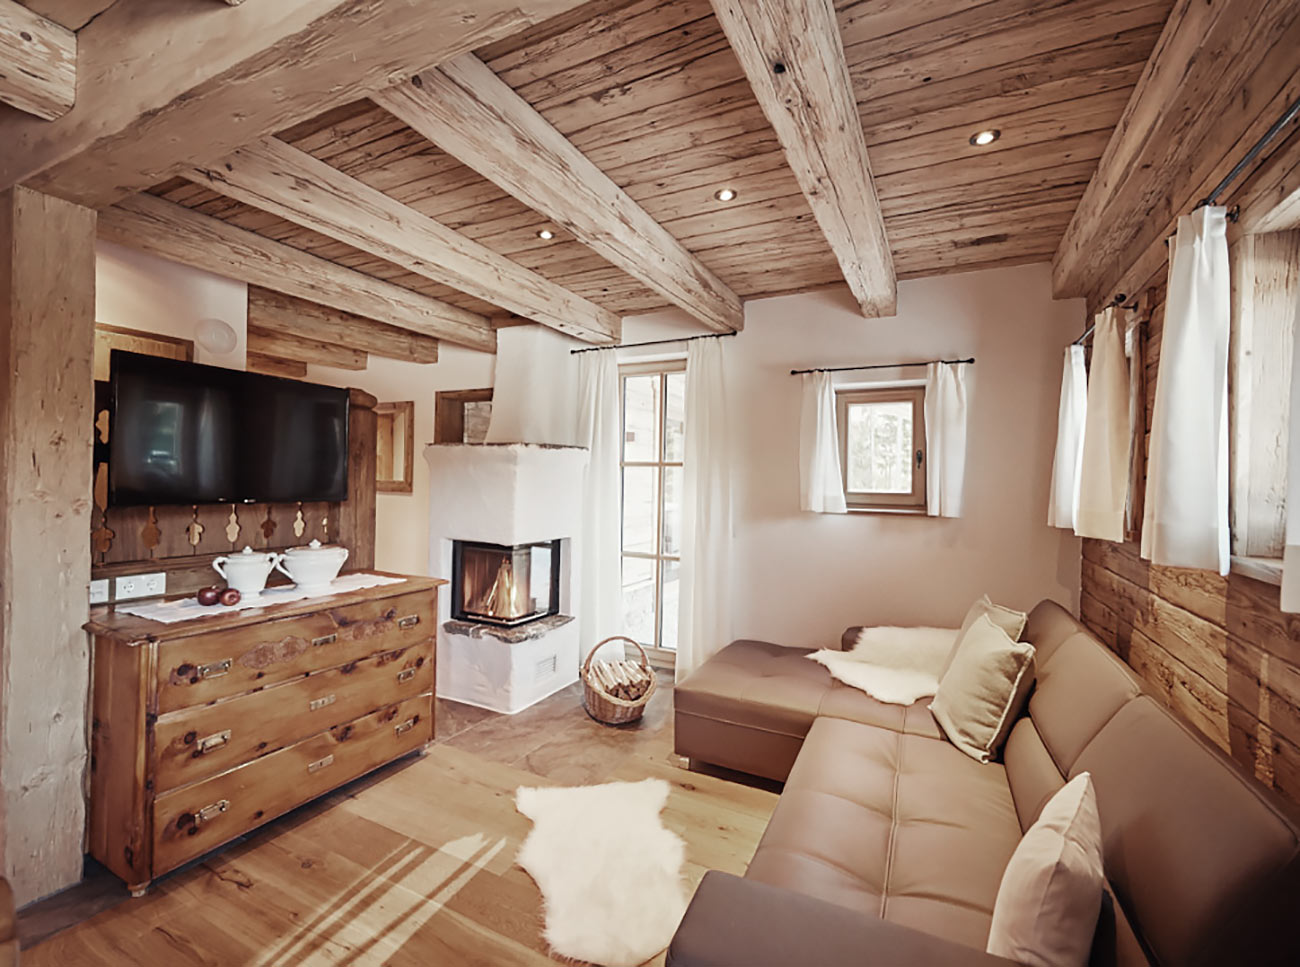 Pretty Hotels: Almidylle Chalets (Image 1)